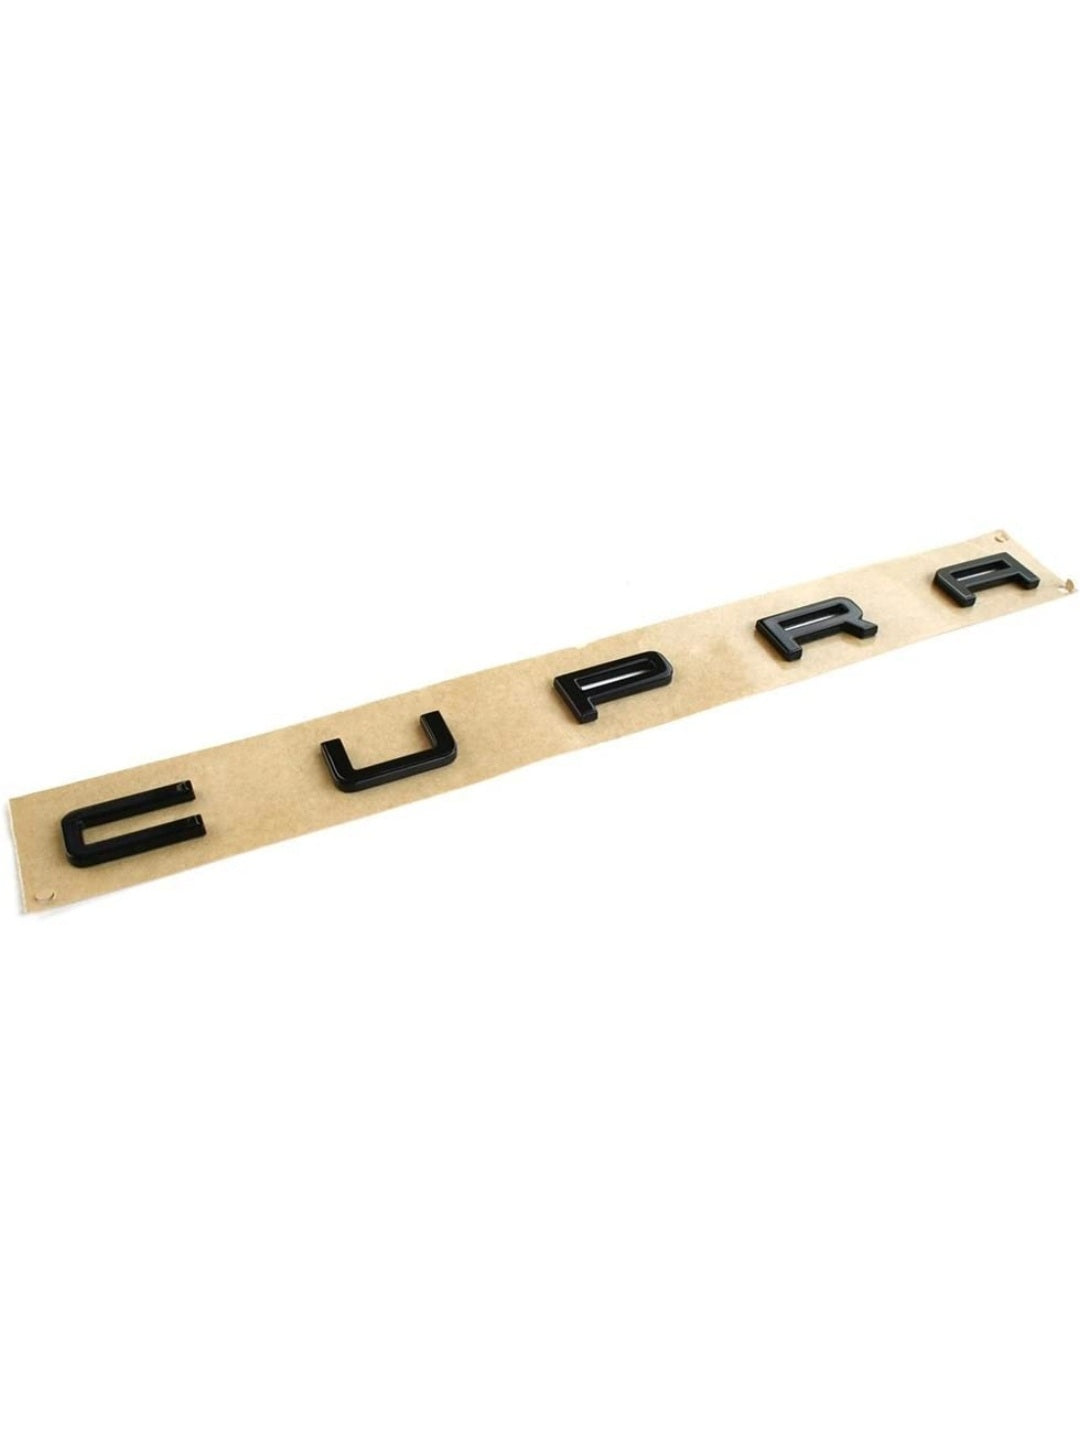 Original Cupra lettering tailgate black glossy or other colors